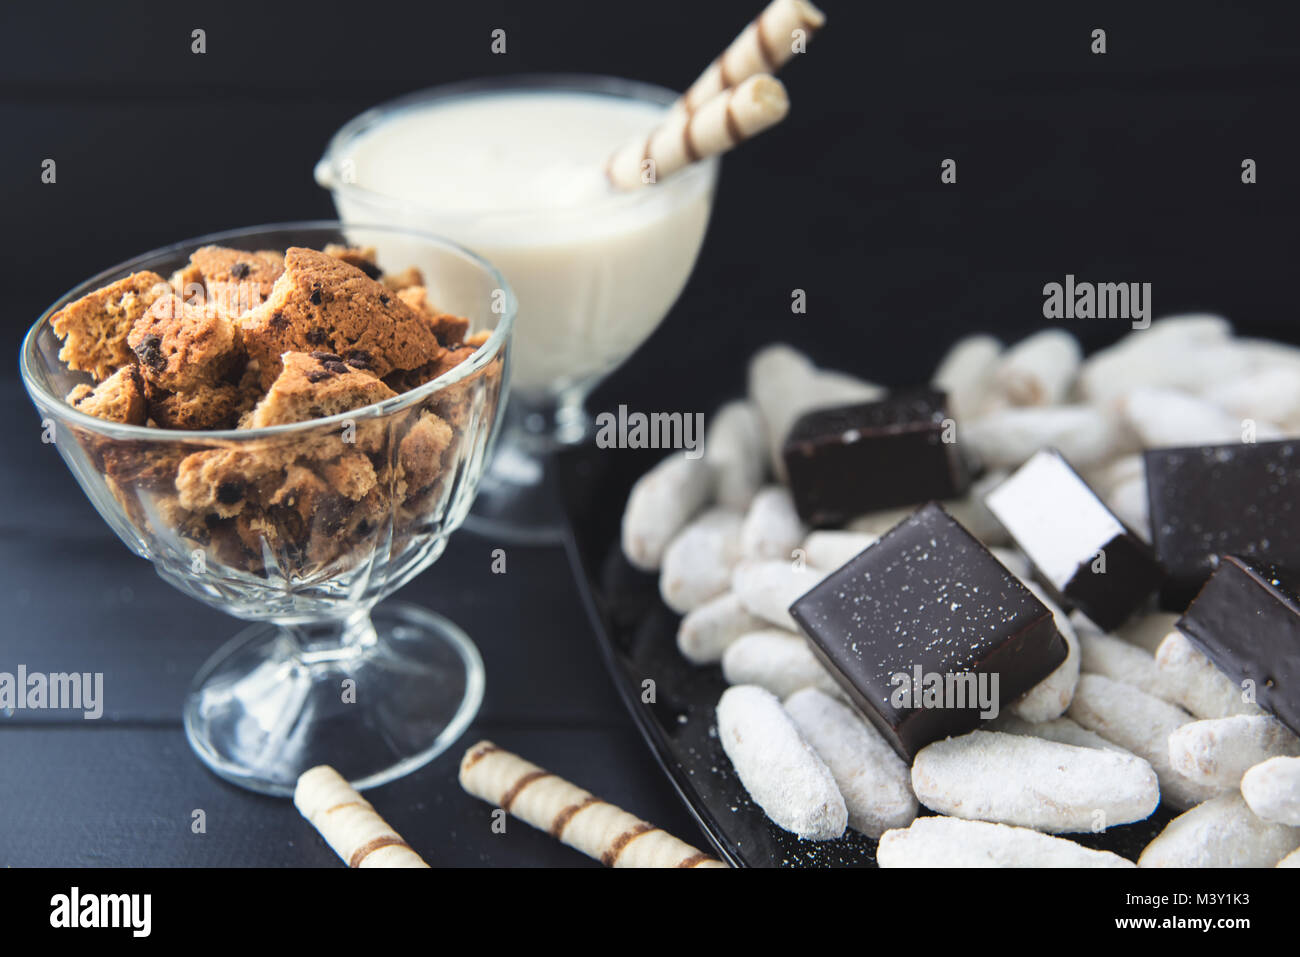 sweets, straws in the cream, cookies and candies on the table Stock Photo